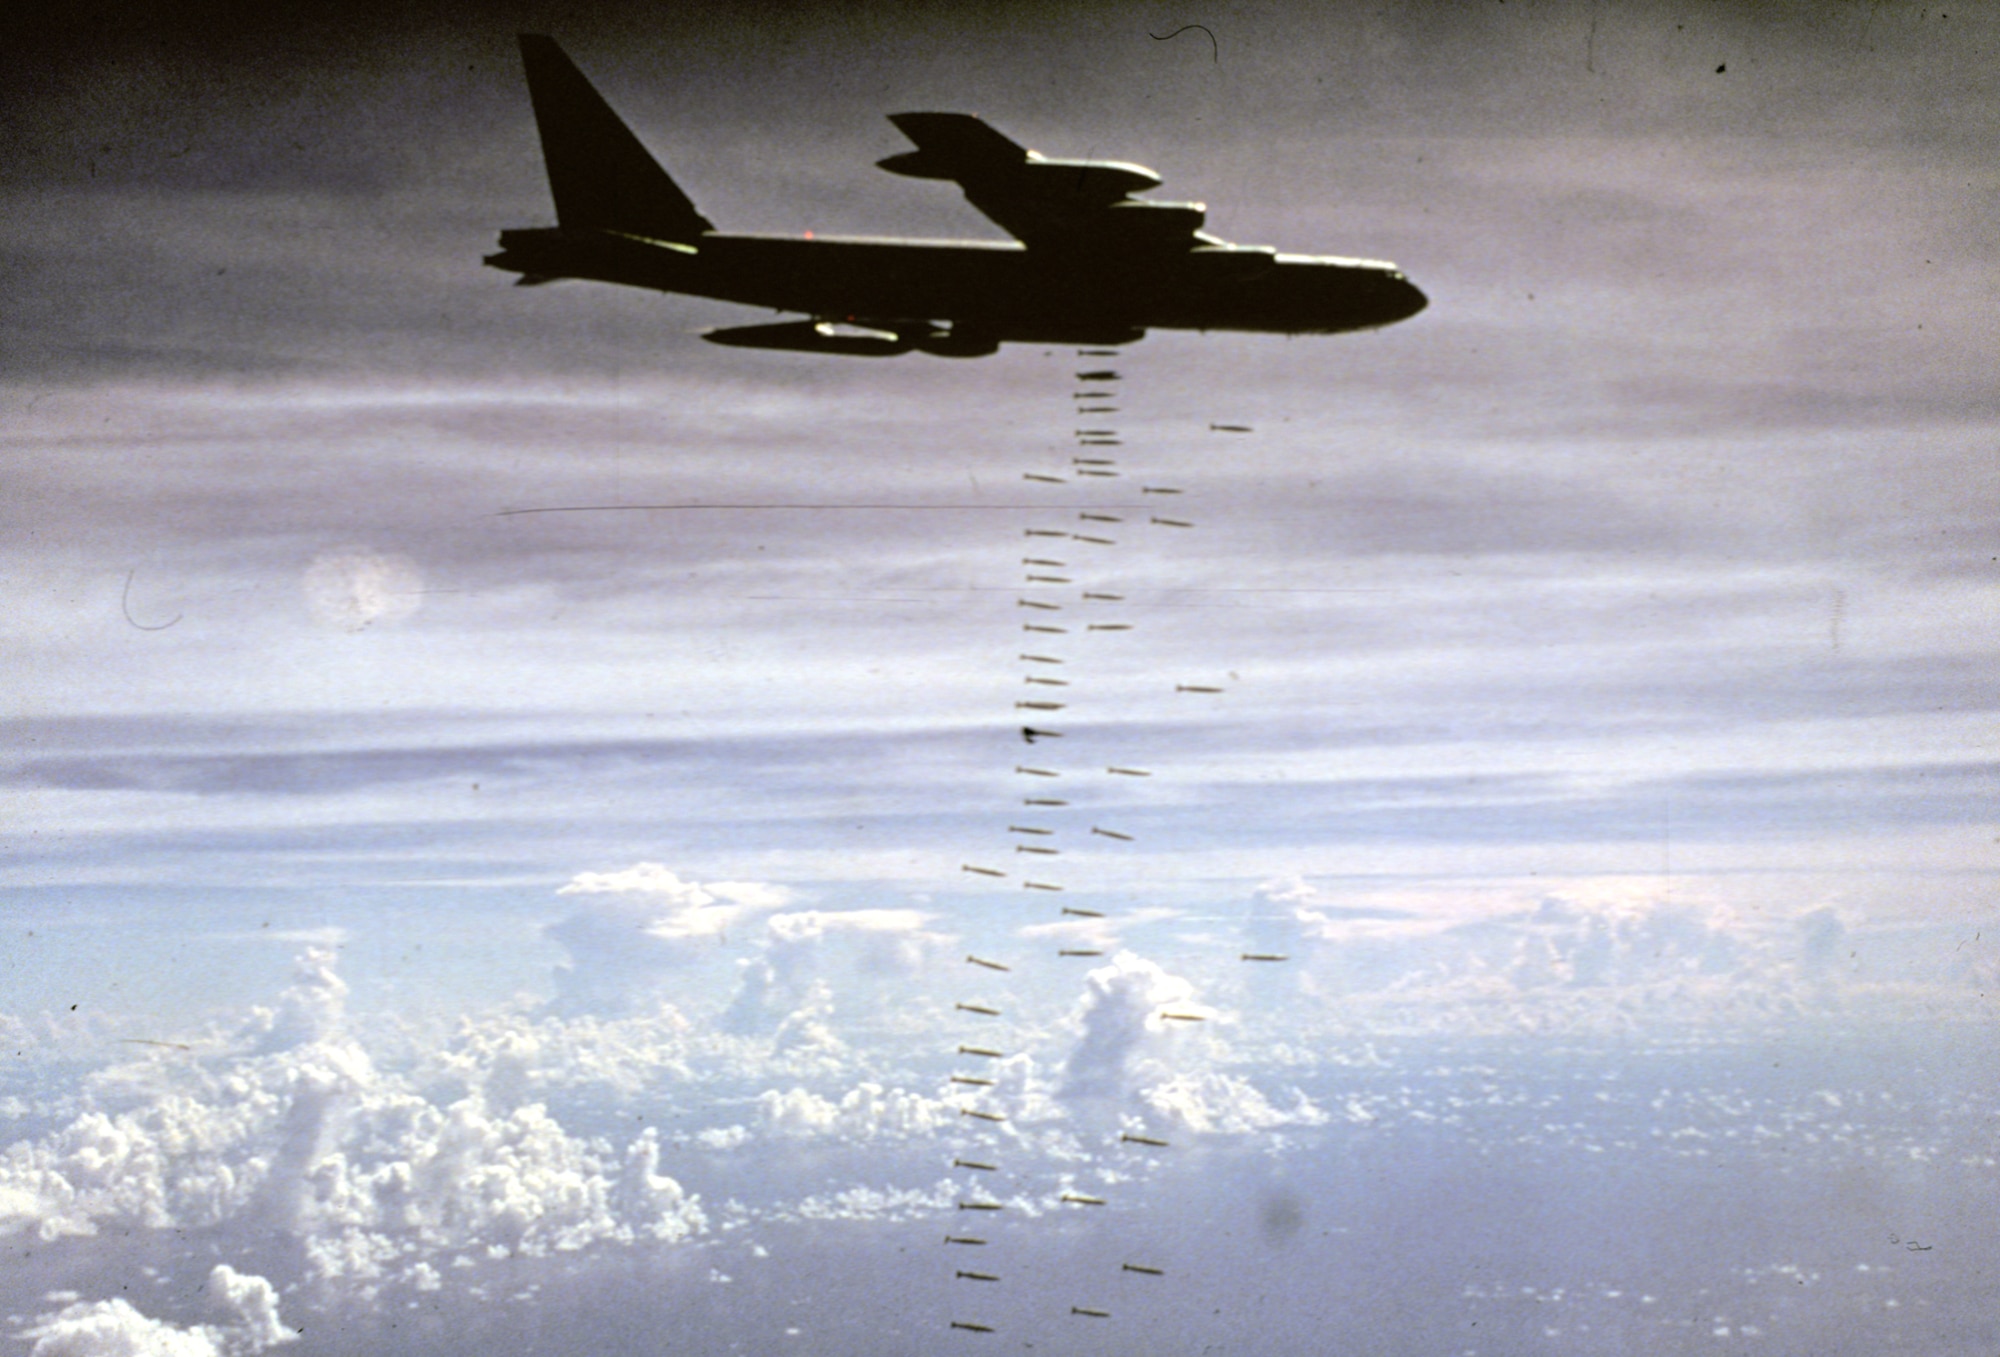 U.S. Air Force B-52 heavy bombers struck communist forces in the missions named ARC LIGHT. (U.S. Air Force photo).